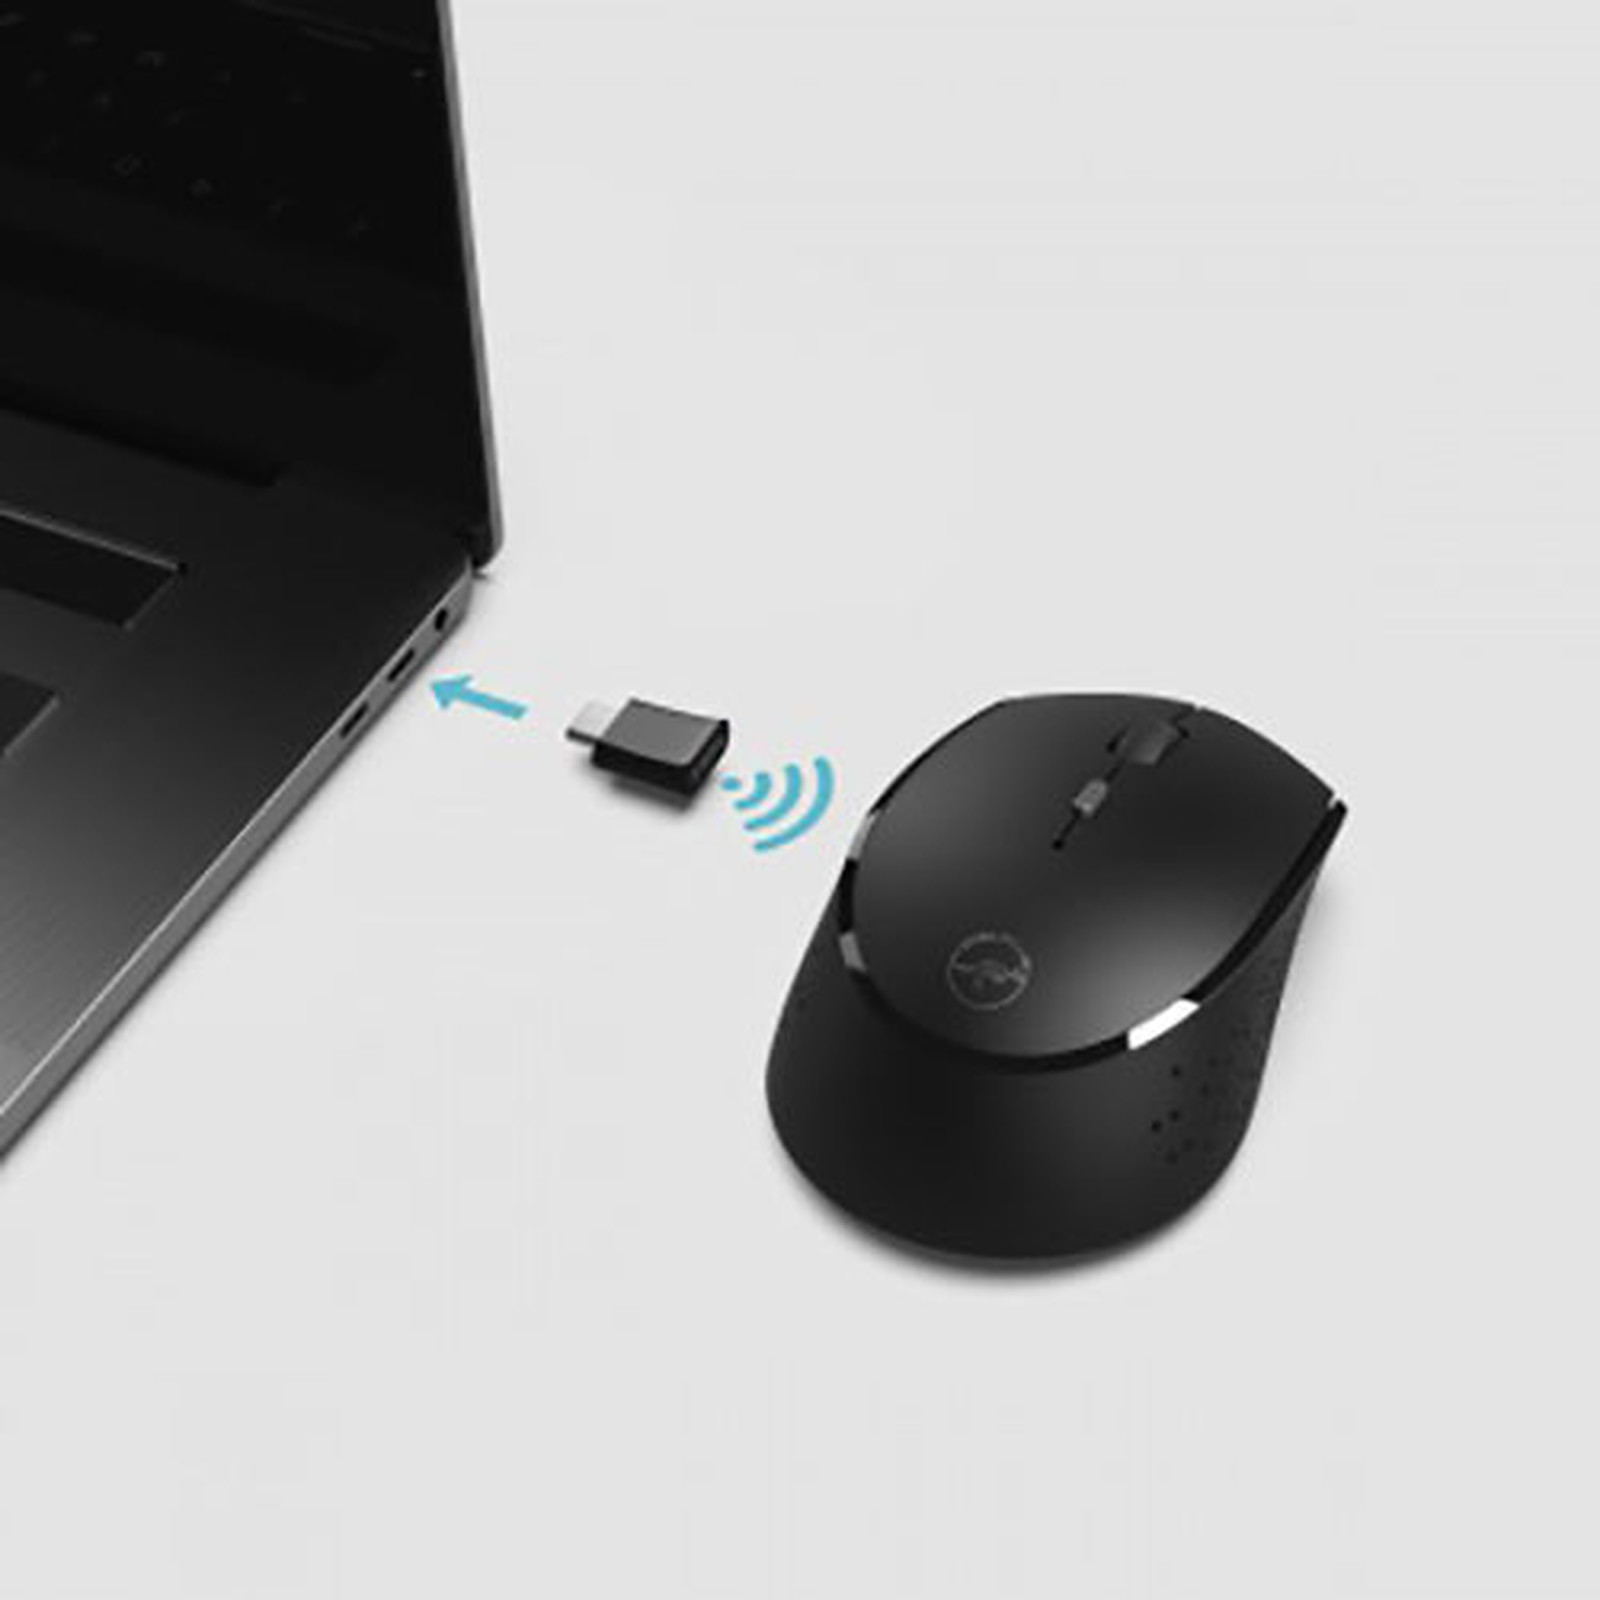 Mobility lab laser mouse for mac download